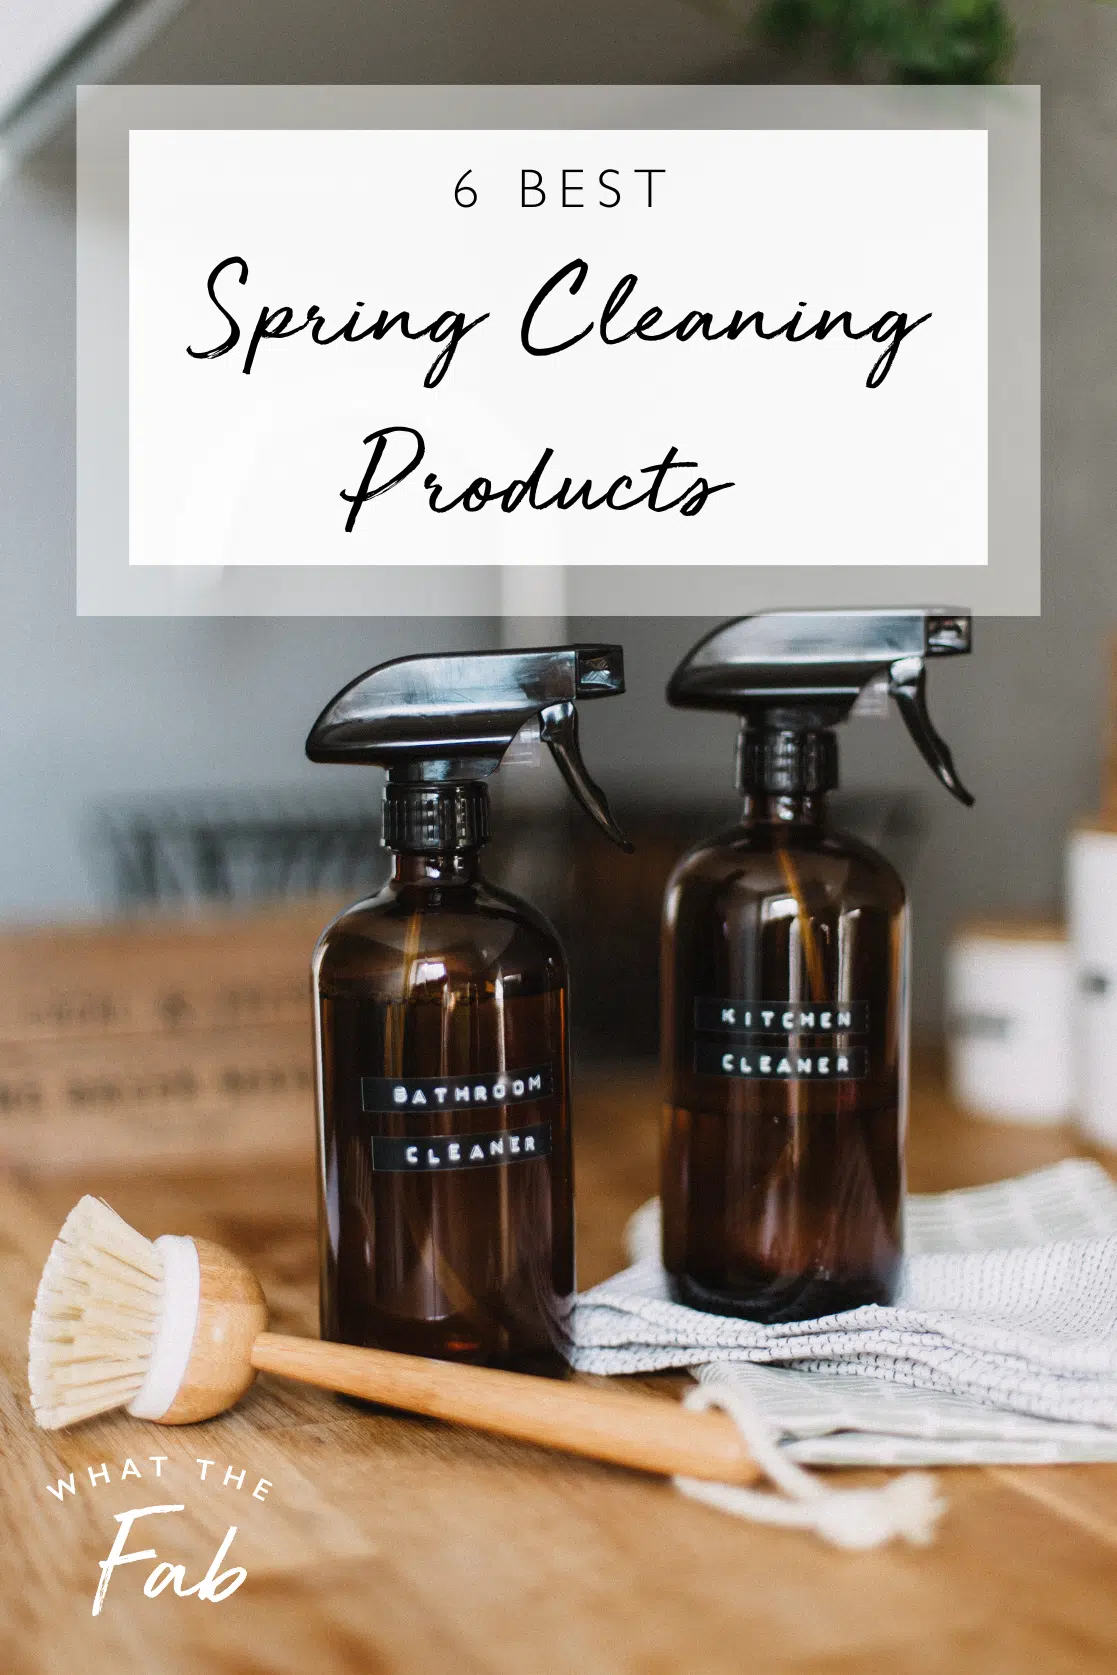 https://whatthefab.com/wp-content/uploads/2023/03/Best-Spring-Cleaning-Products.png.webp